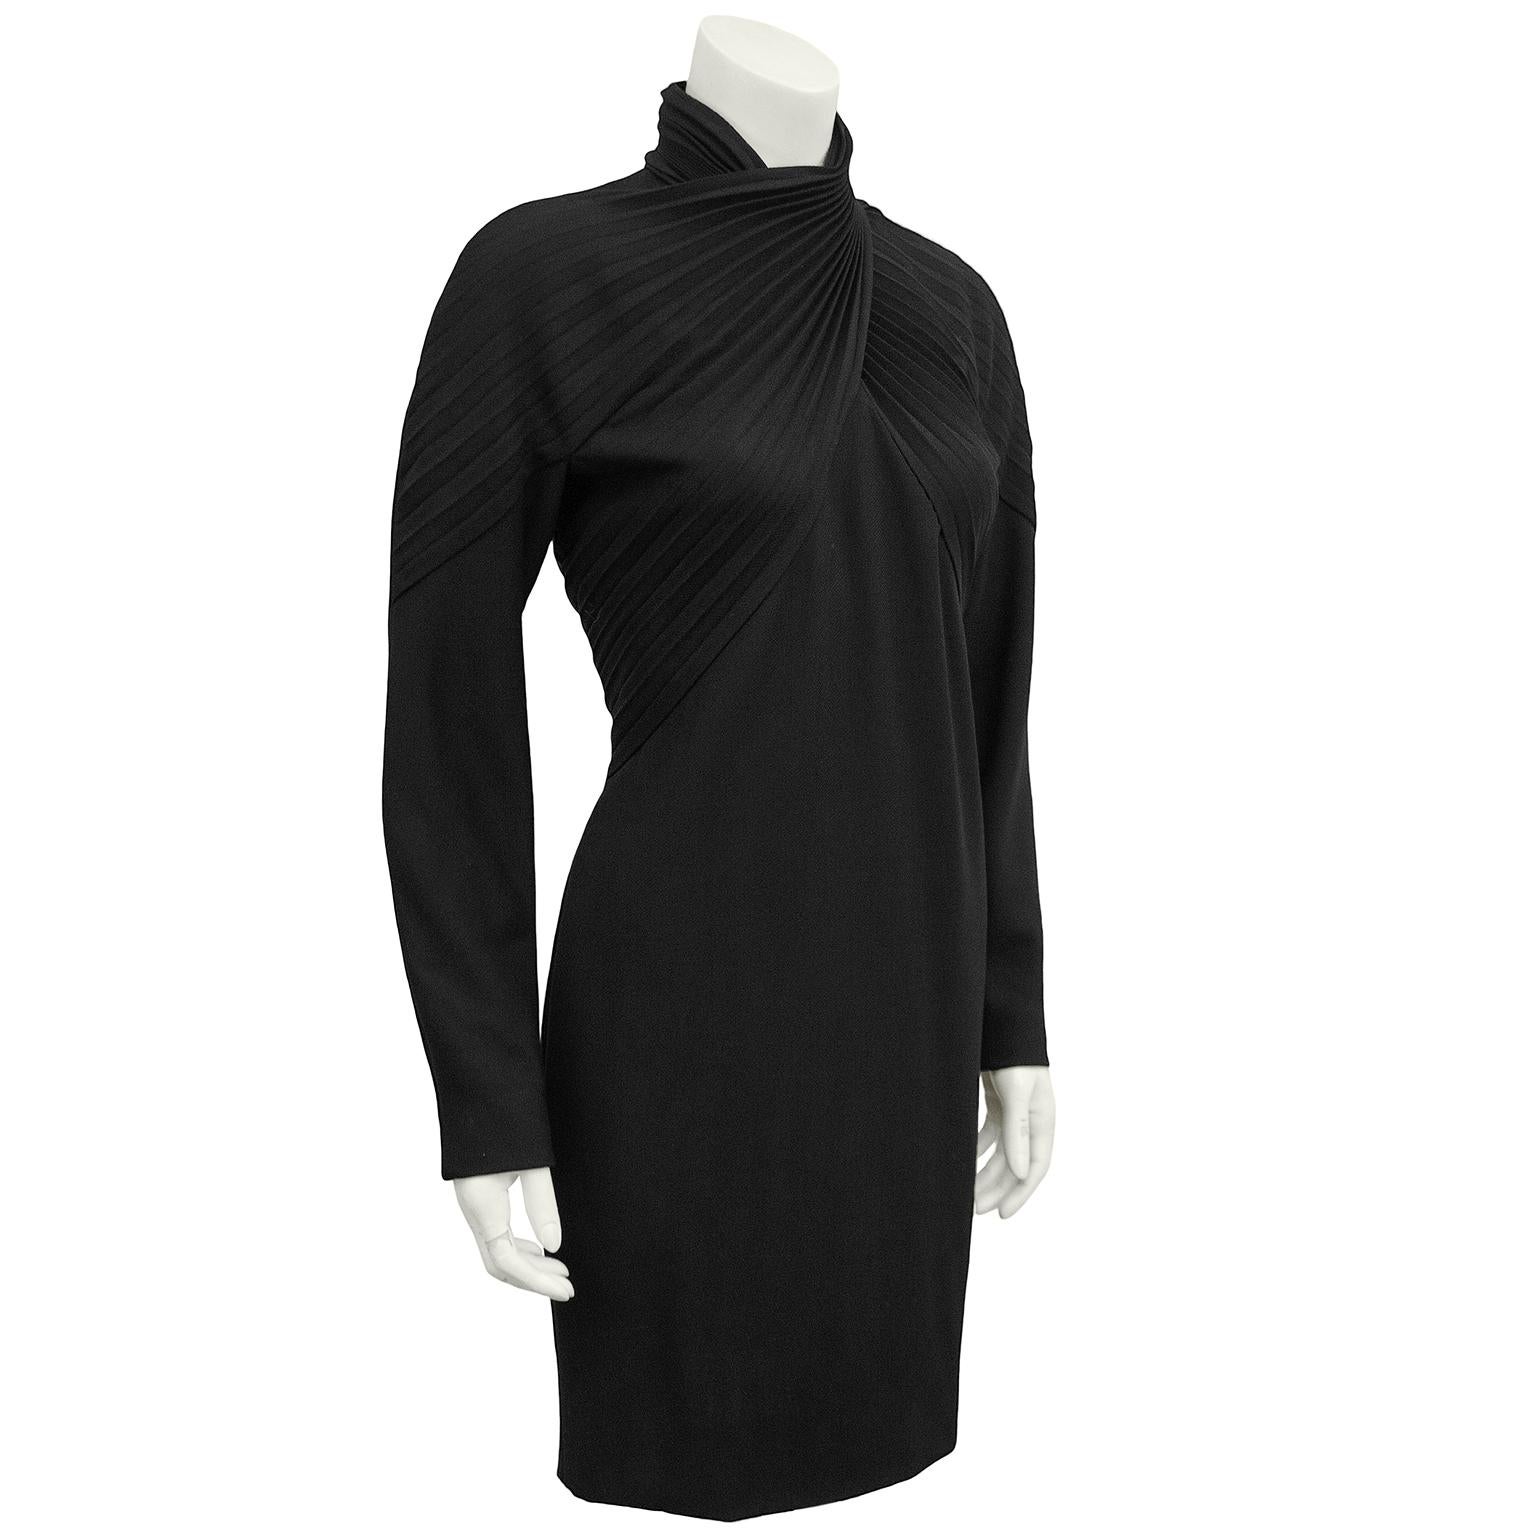 1980s black label Gianni Versace black wool cocktail dress featuring long sleeves and a turtle neckline. Beautiful pleating details at the bust that cross and wrap around the neck, creating a turtleneck. Hits above the knee. Zipper closure up centre